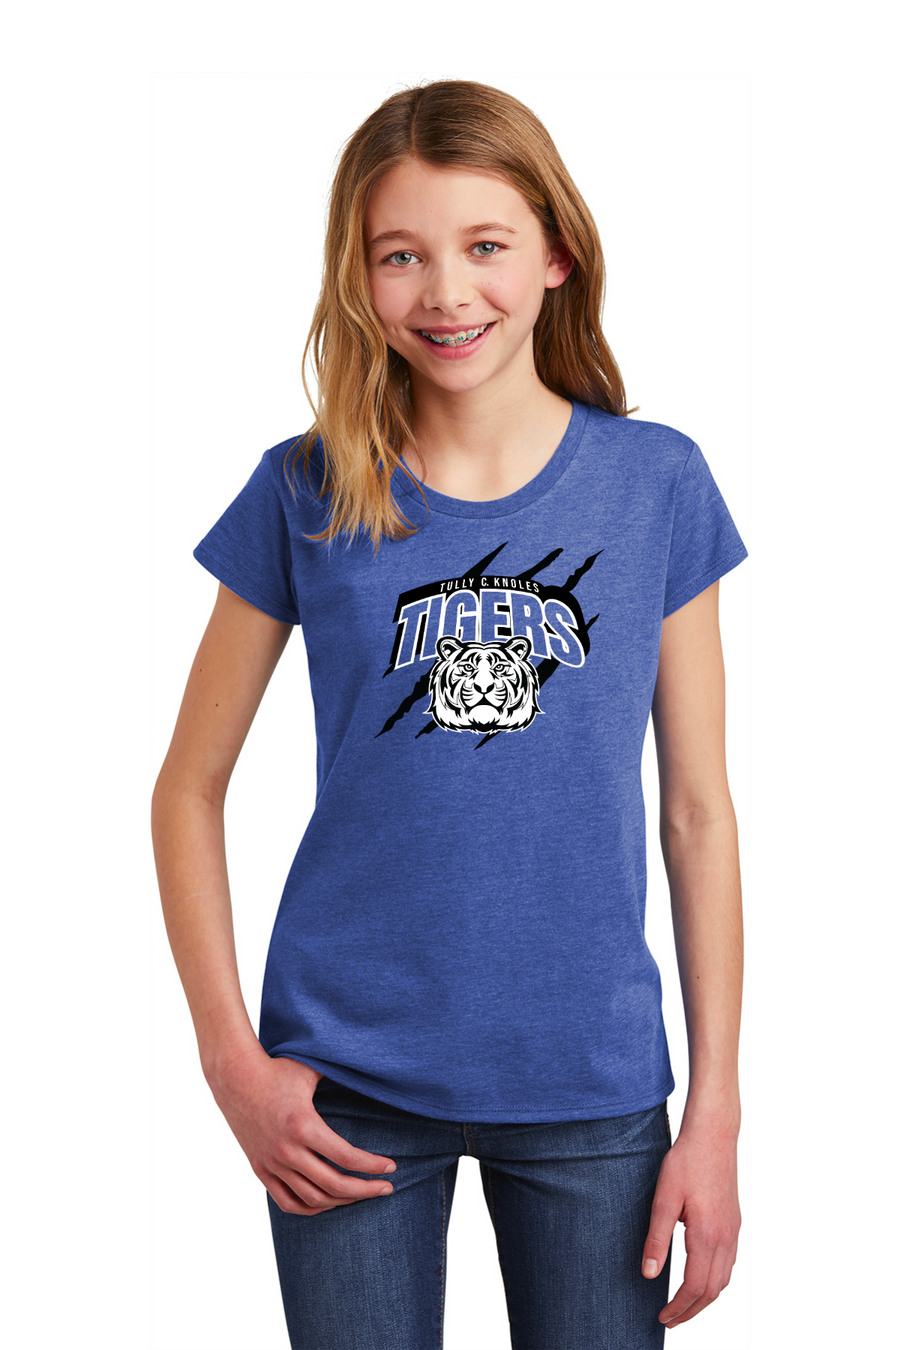 Tully C Knoles - Spirit Wear 23/24 On-Demand-Youth District Girls Tee Tiger Logo